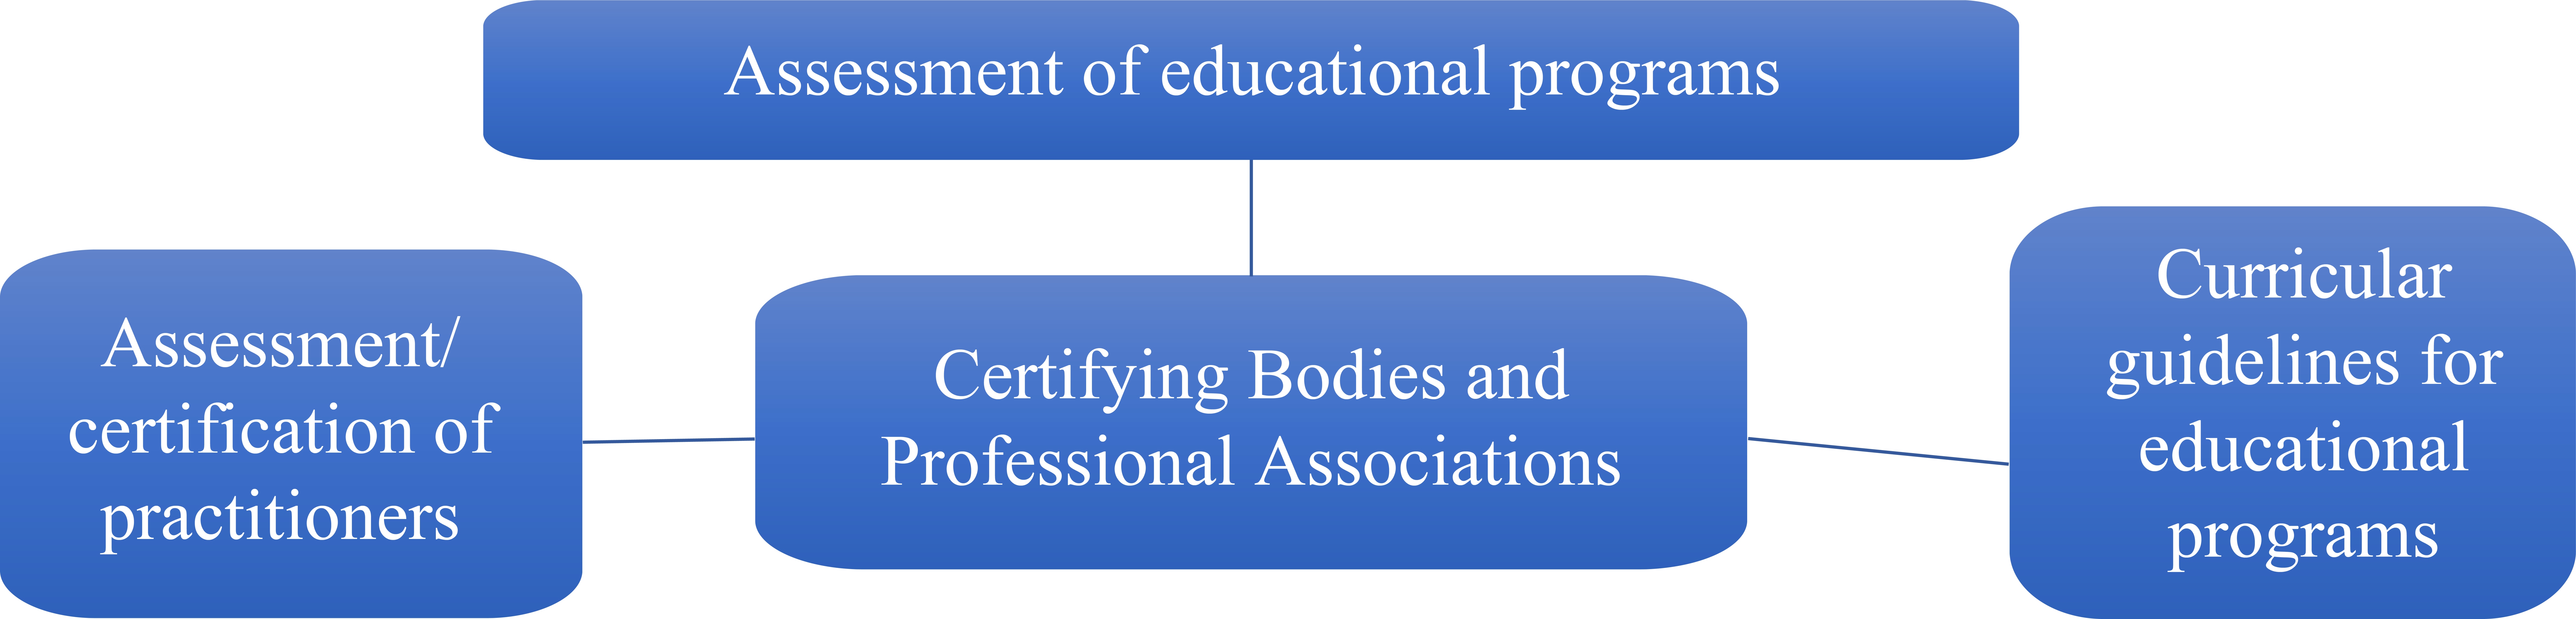 Competency needs of certifying bodies and professional associations.